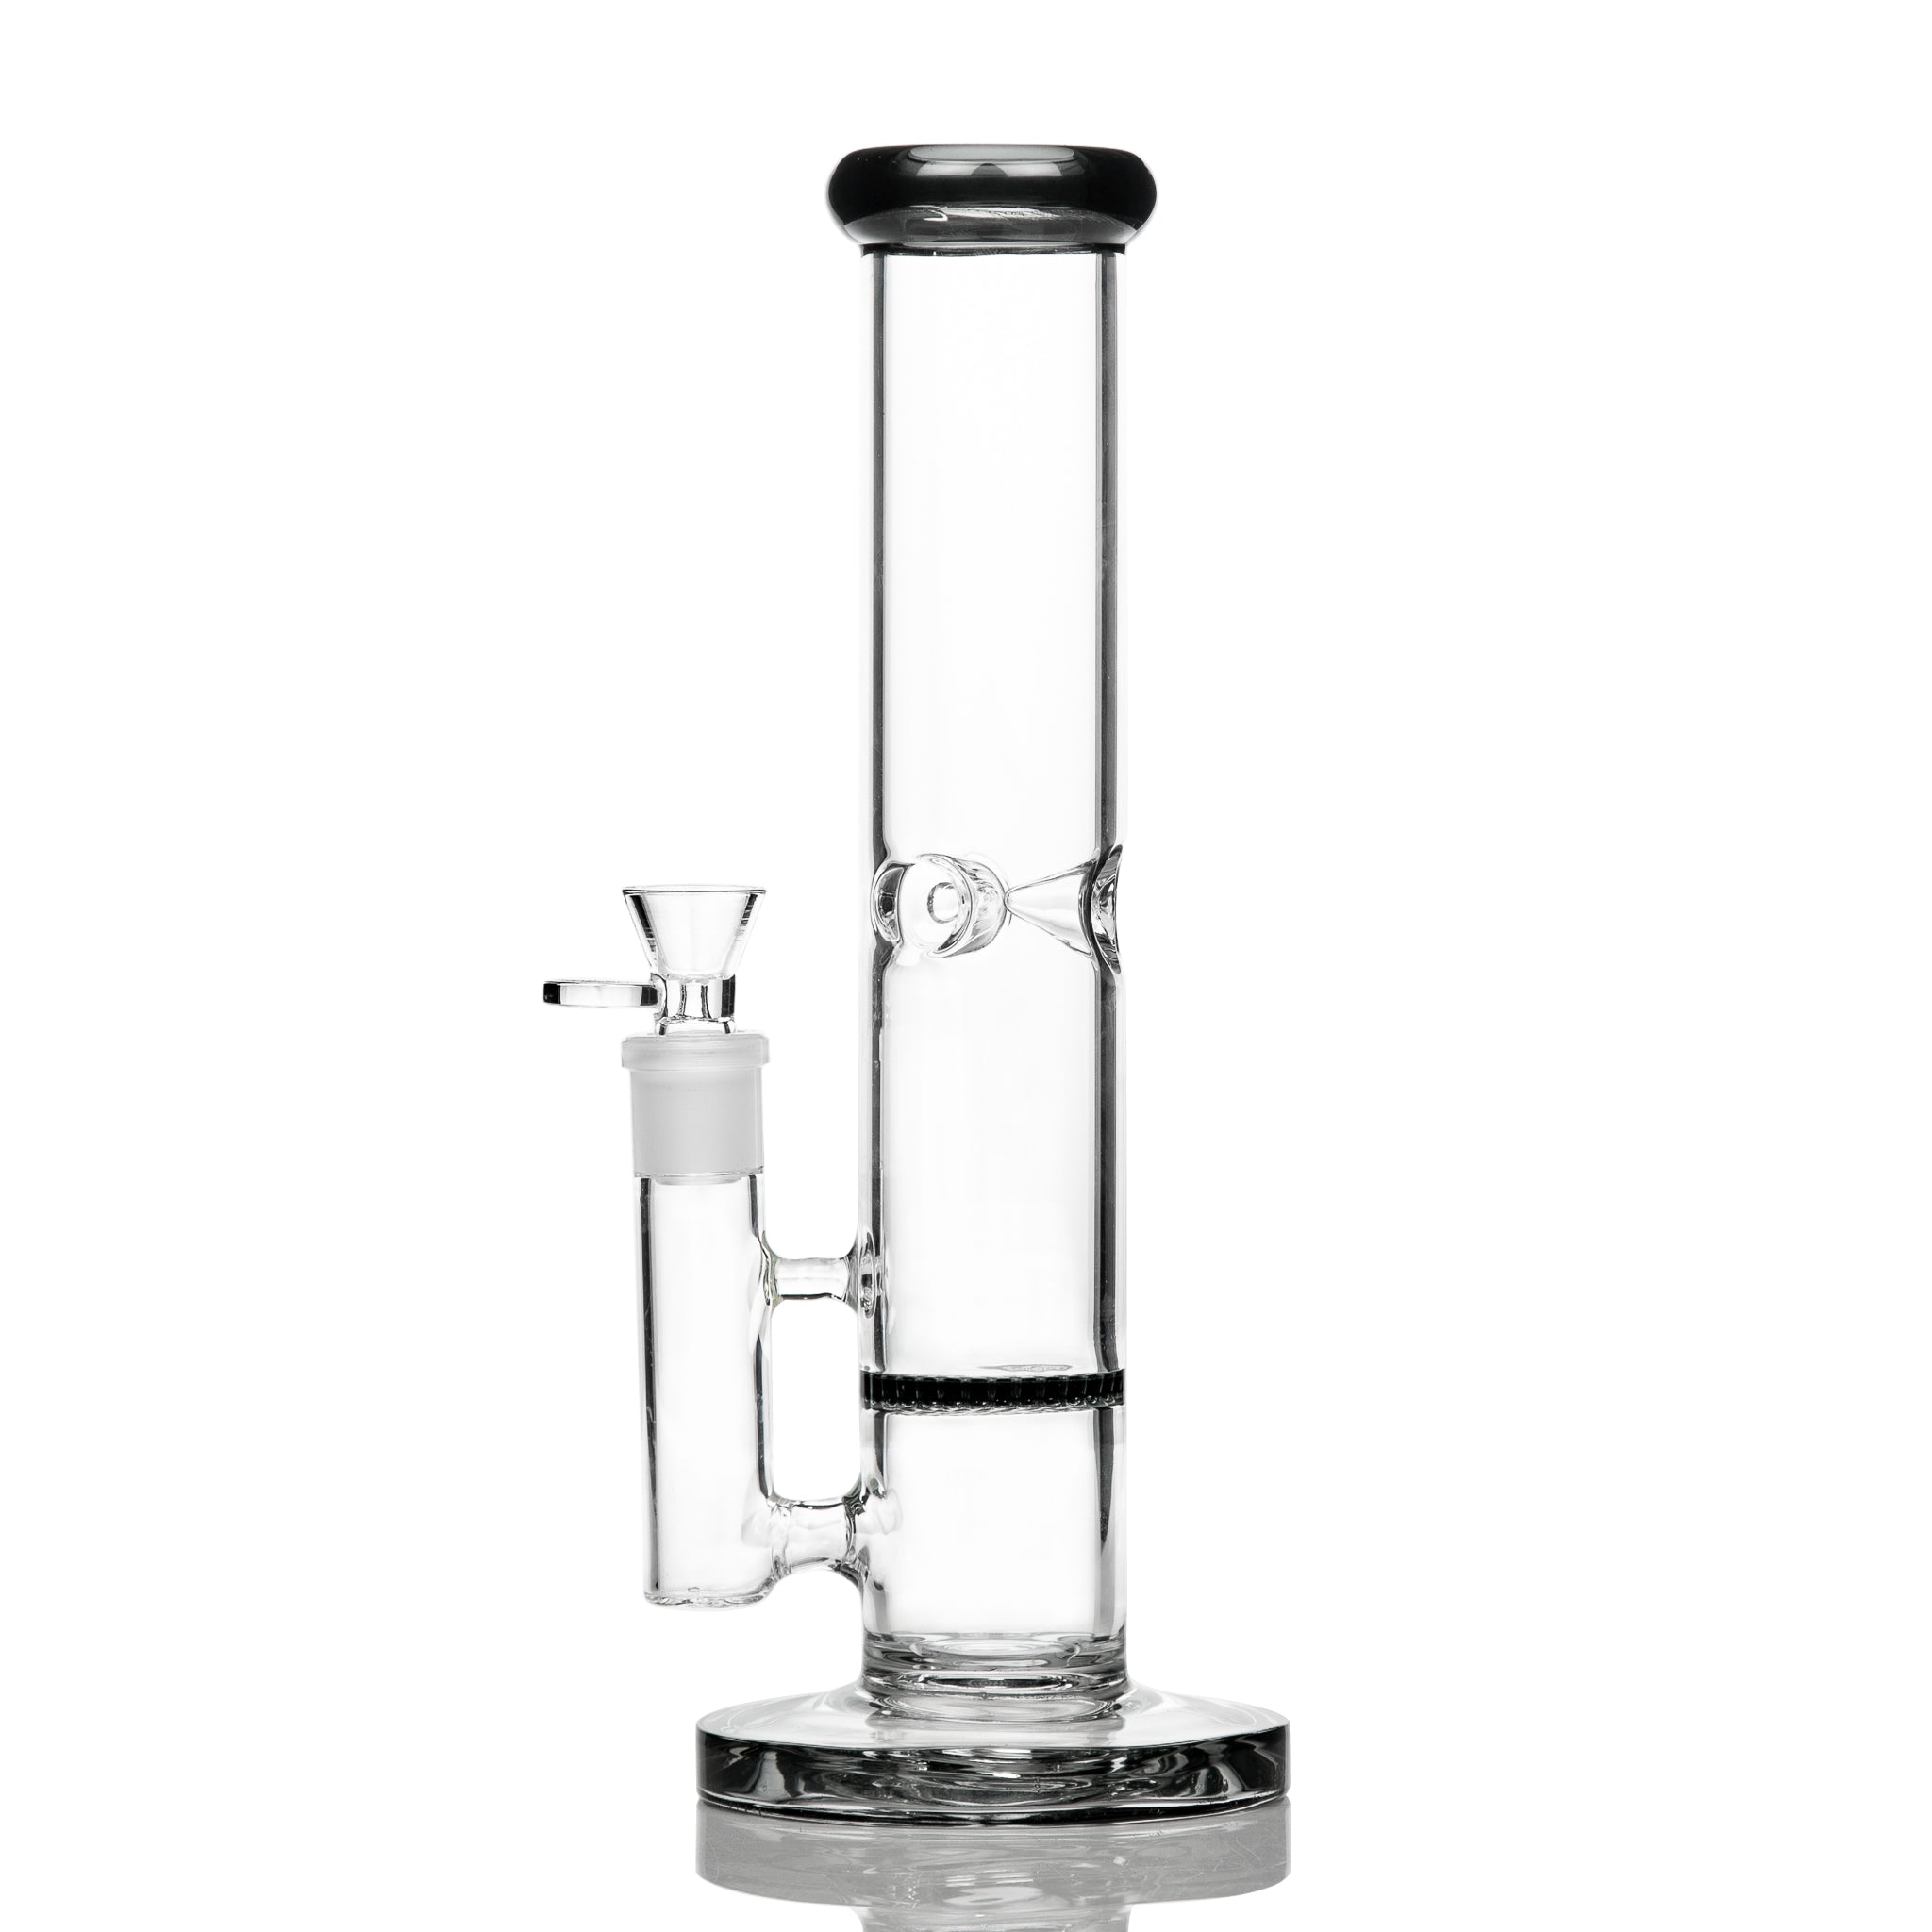 Honeycomb perc cheap glass bong with cone piece at Easy shop in Australia.